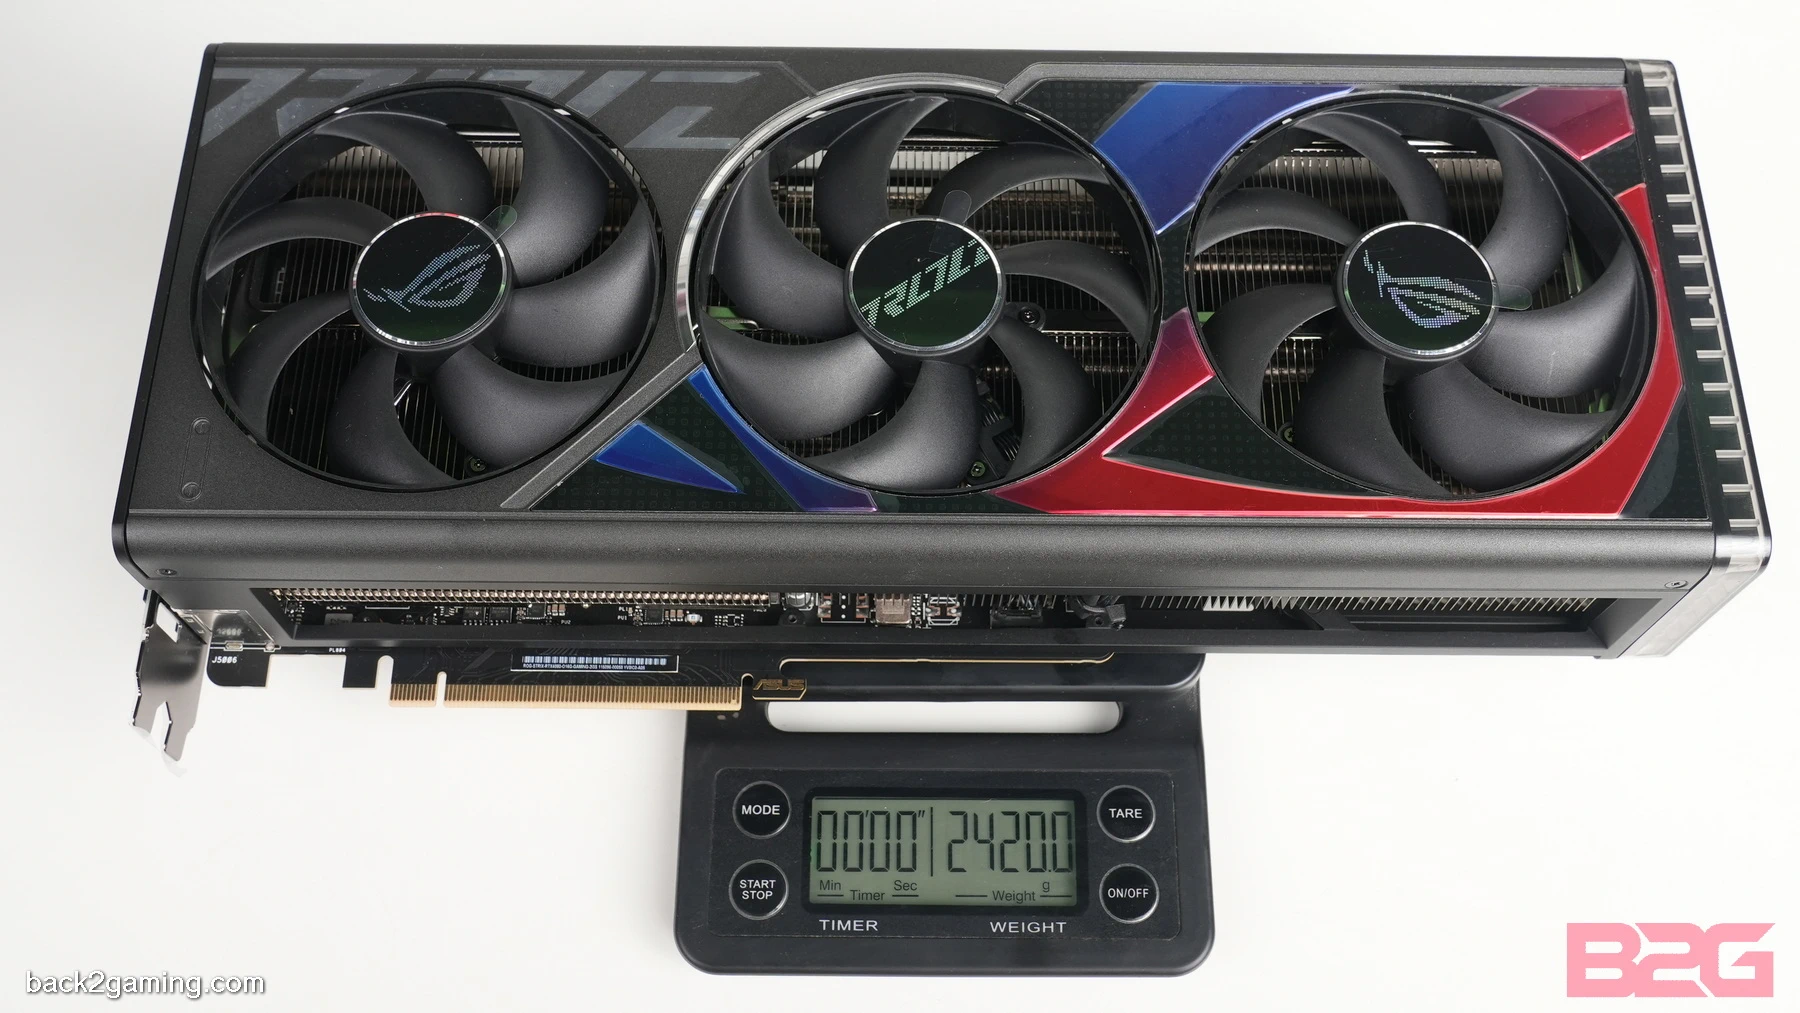 ASUS ROG STRIX RTX 4080 OC 16GB Graphics Card Review -